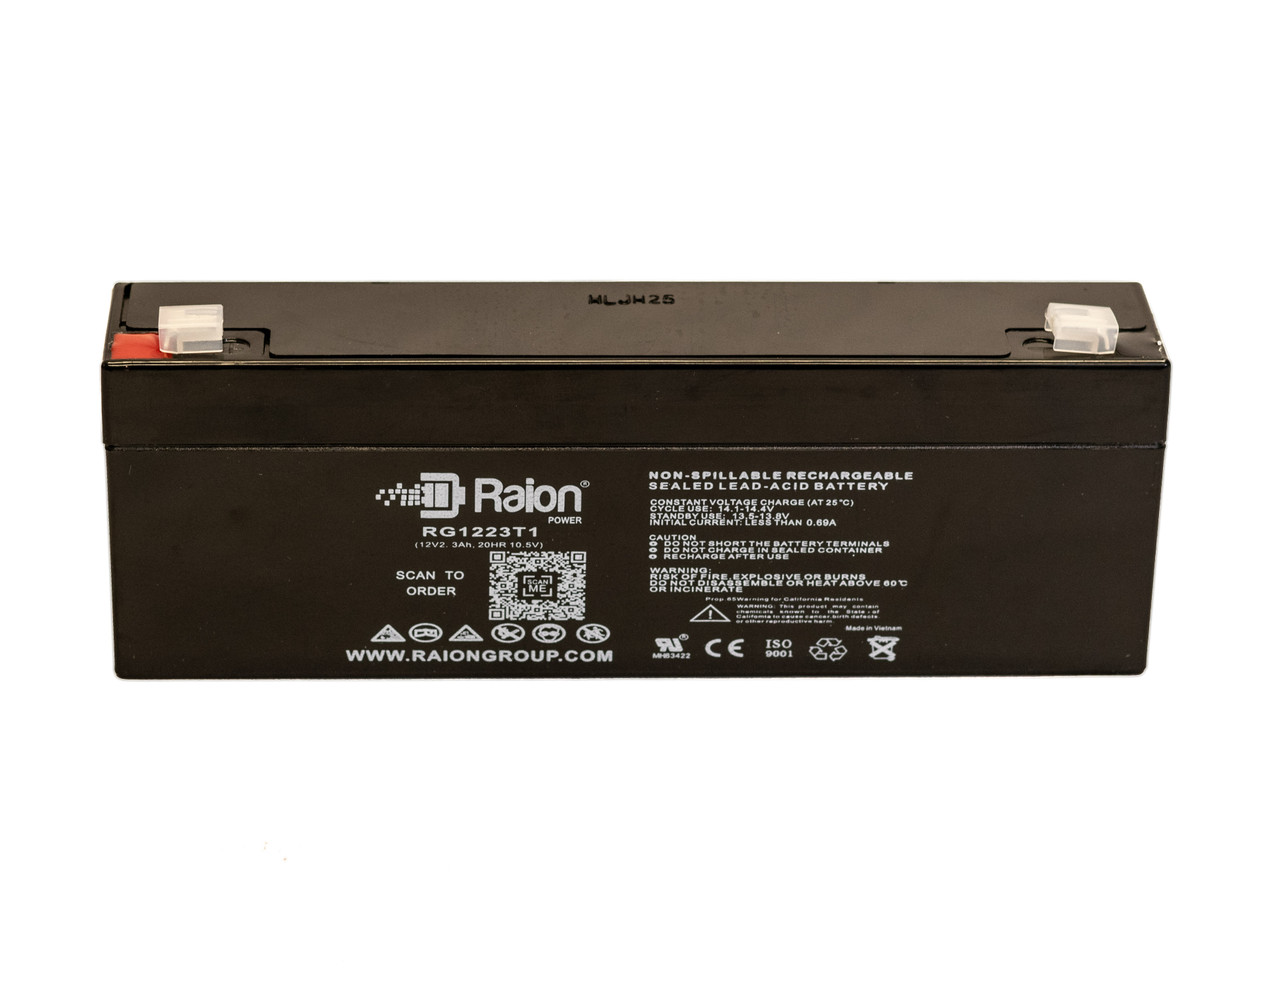 Raion Power 12V 2.3Ah SLA Battery With T1 Terminals For Zimmer ATS 1500 Tourniquet